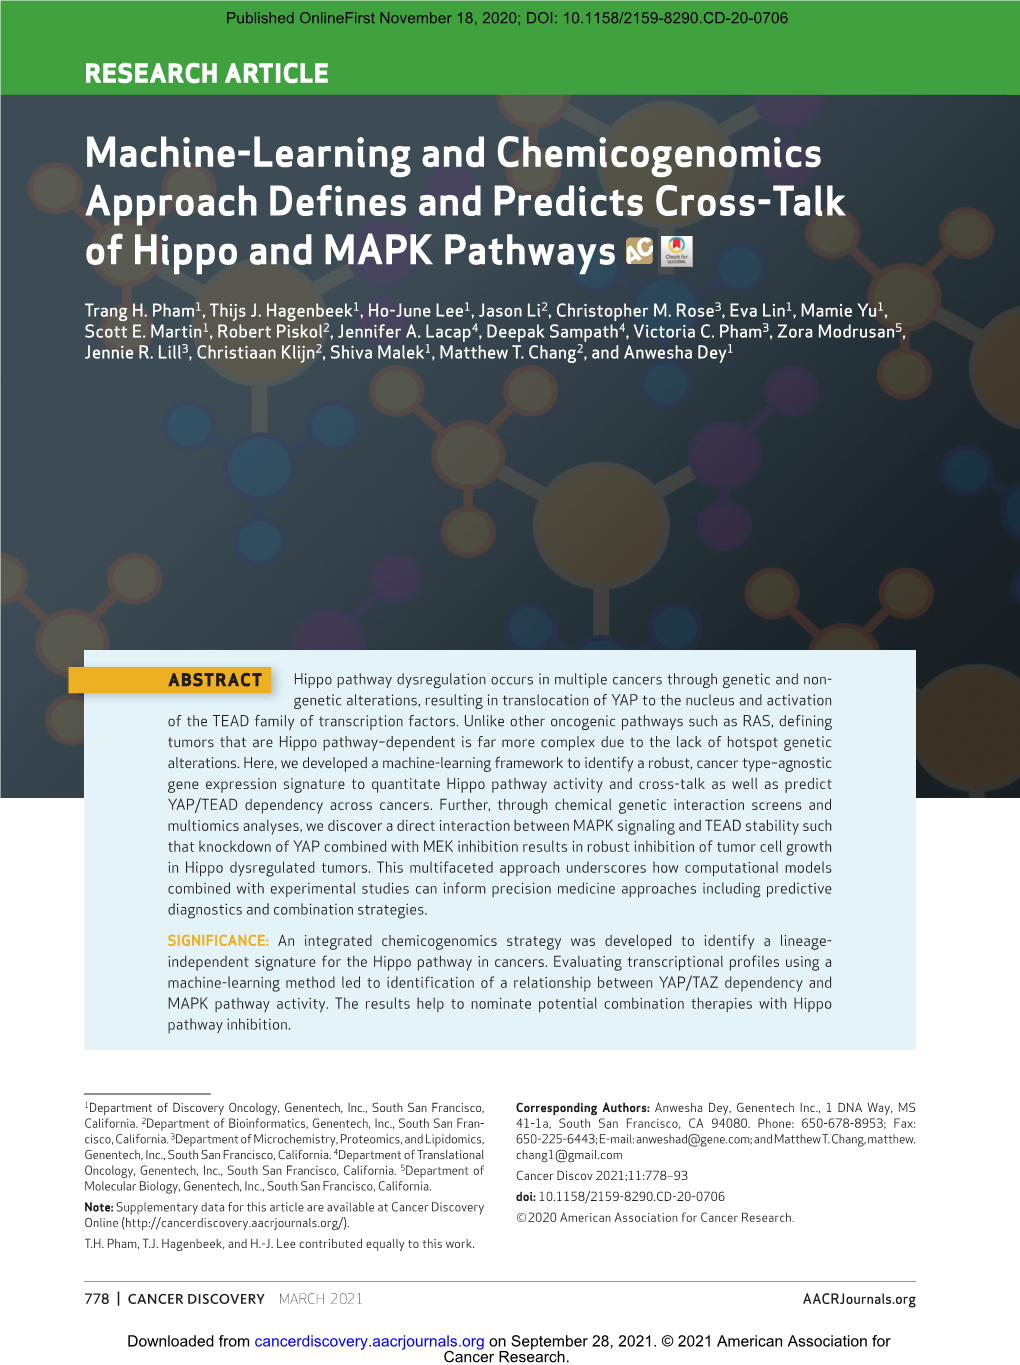 Machine-Learning and Chemicogenomics Approach Defi Nes and Predicts Cross-Talk of Hippo and MAPK Pathways